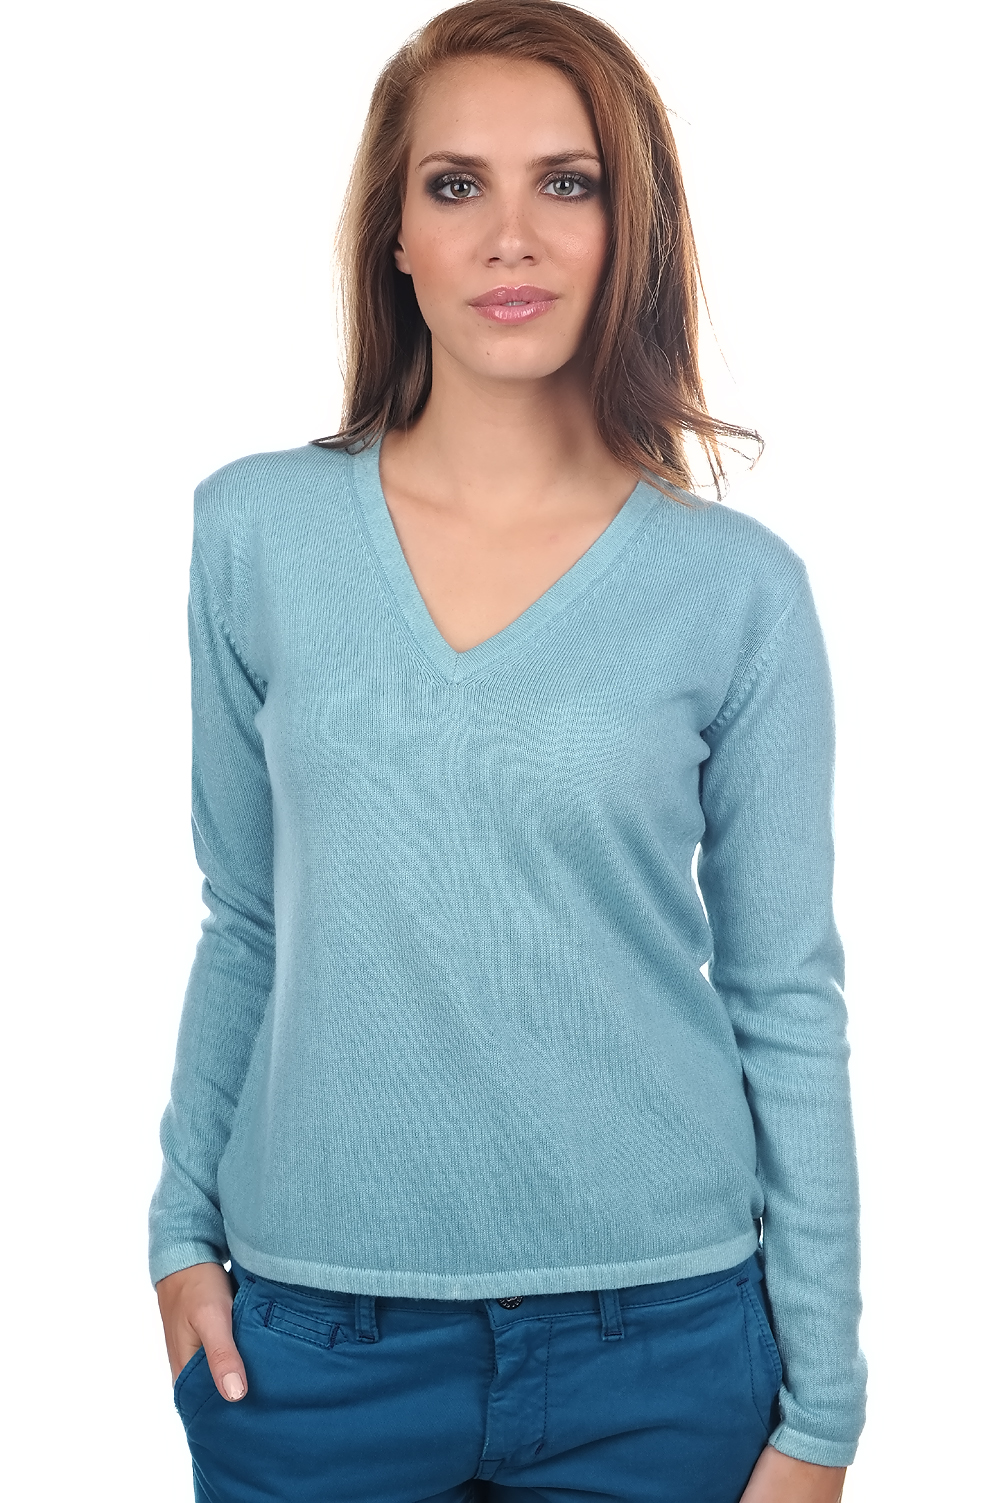 Cashmere ladies timeless classics emma teal blue s